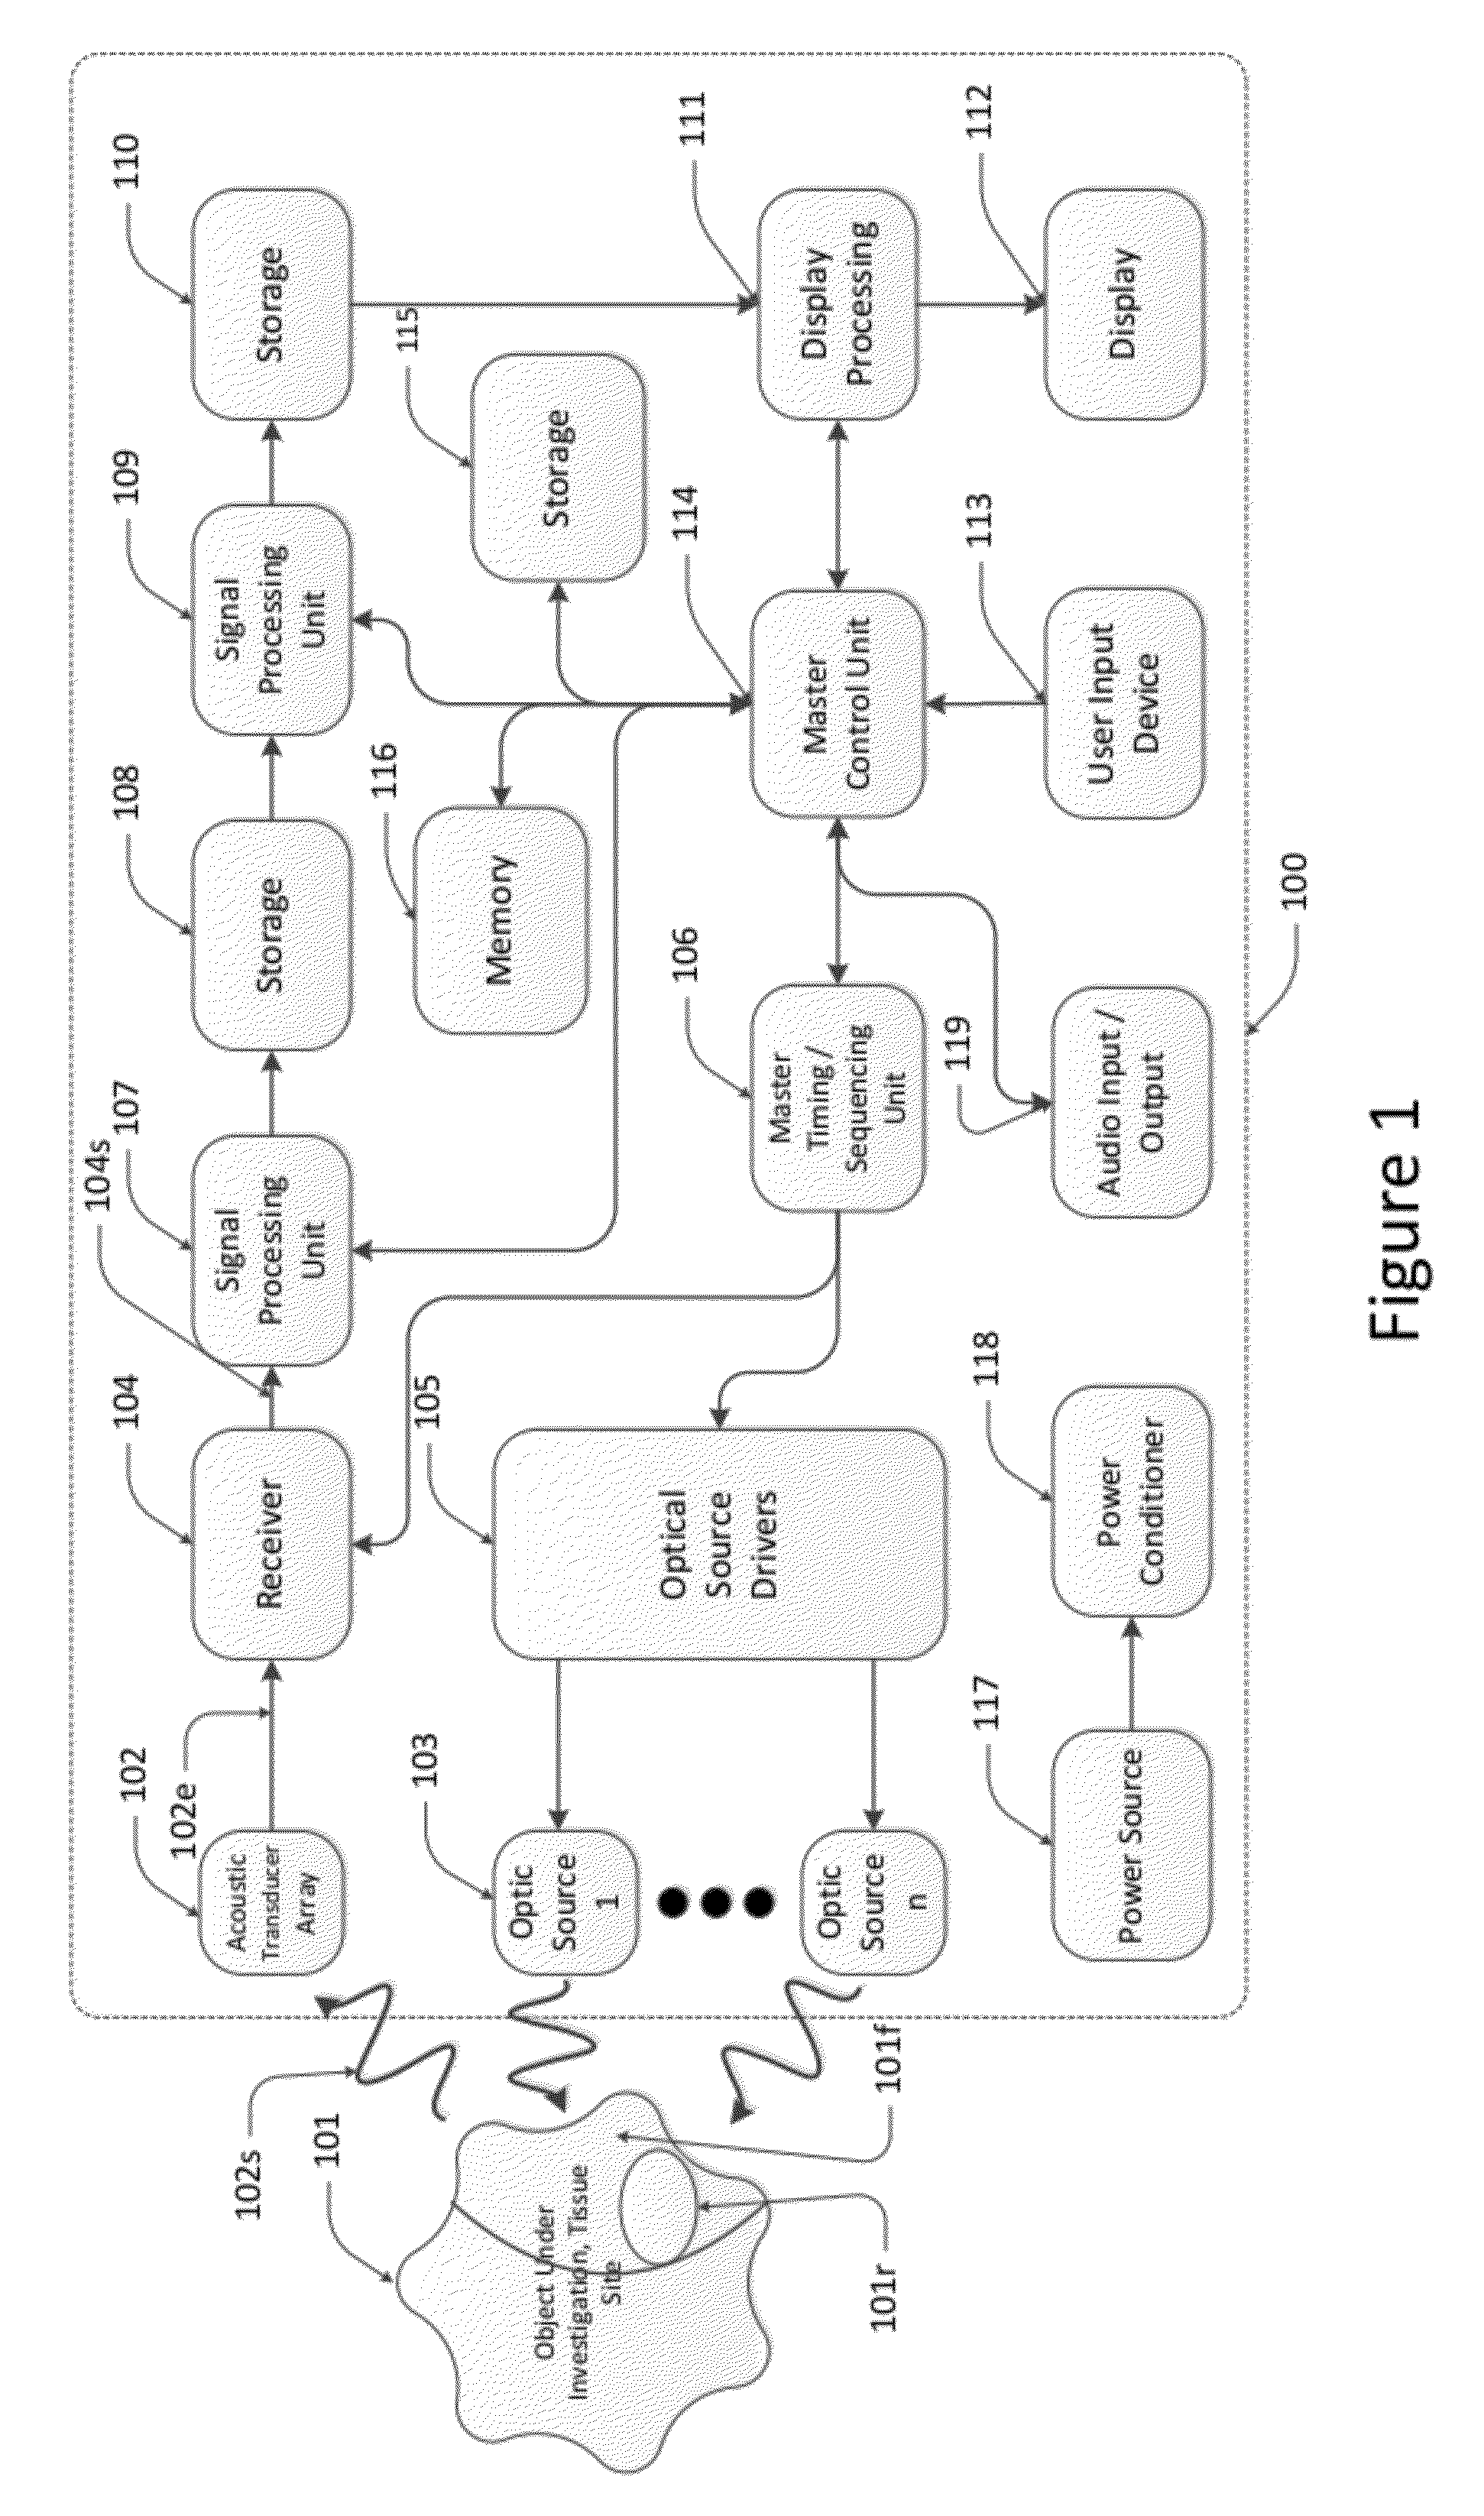 Apparatus, system and methods for photoacoustic detection of deep vein thrombosis